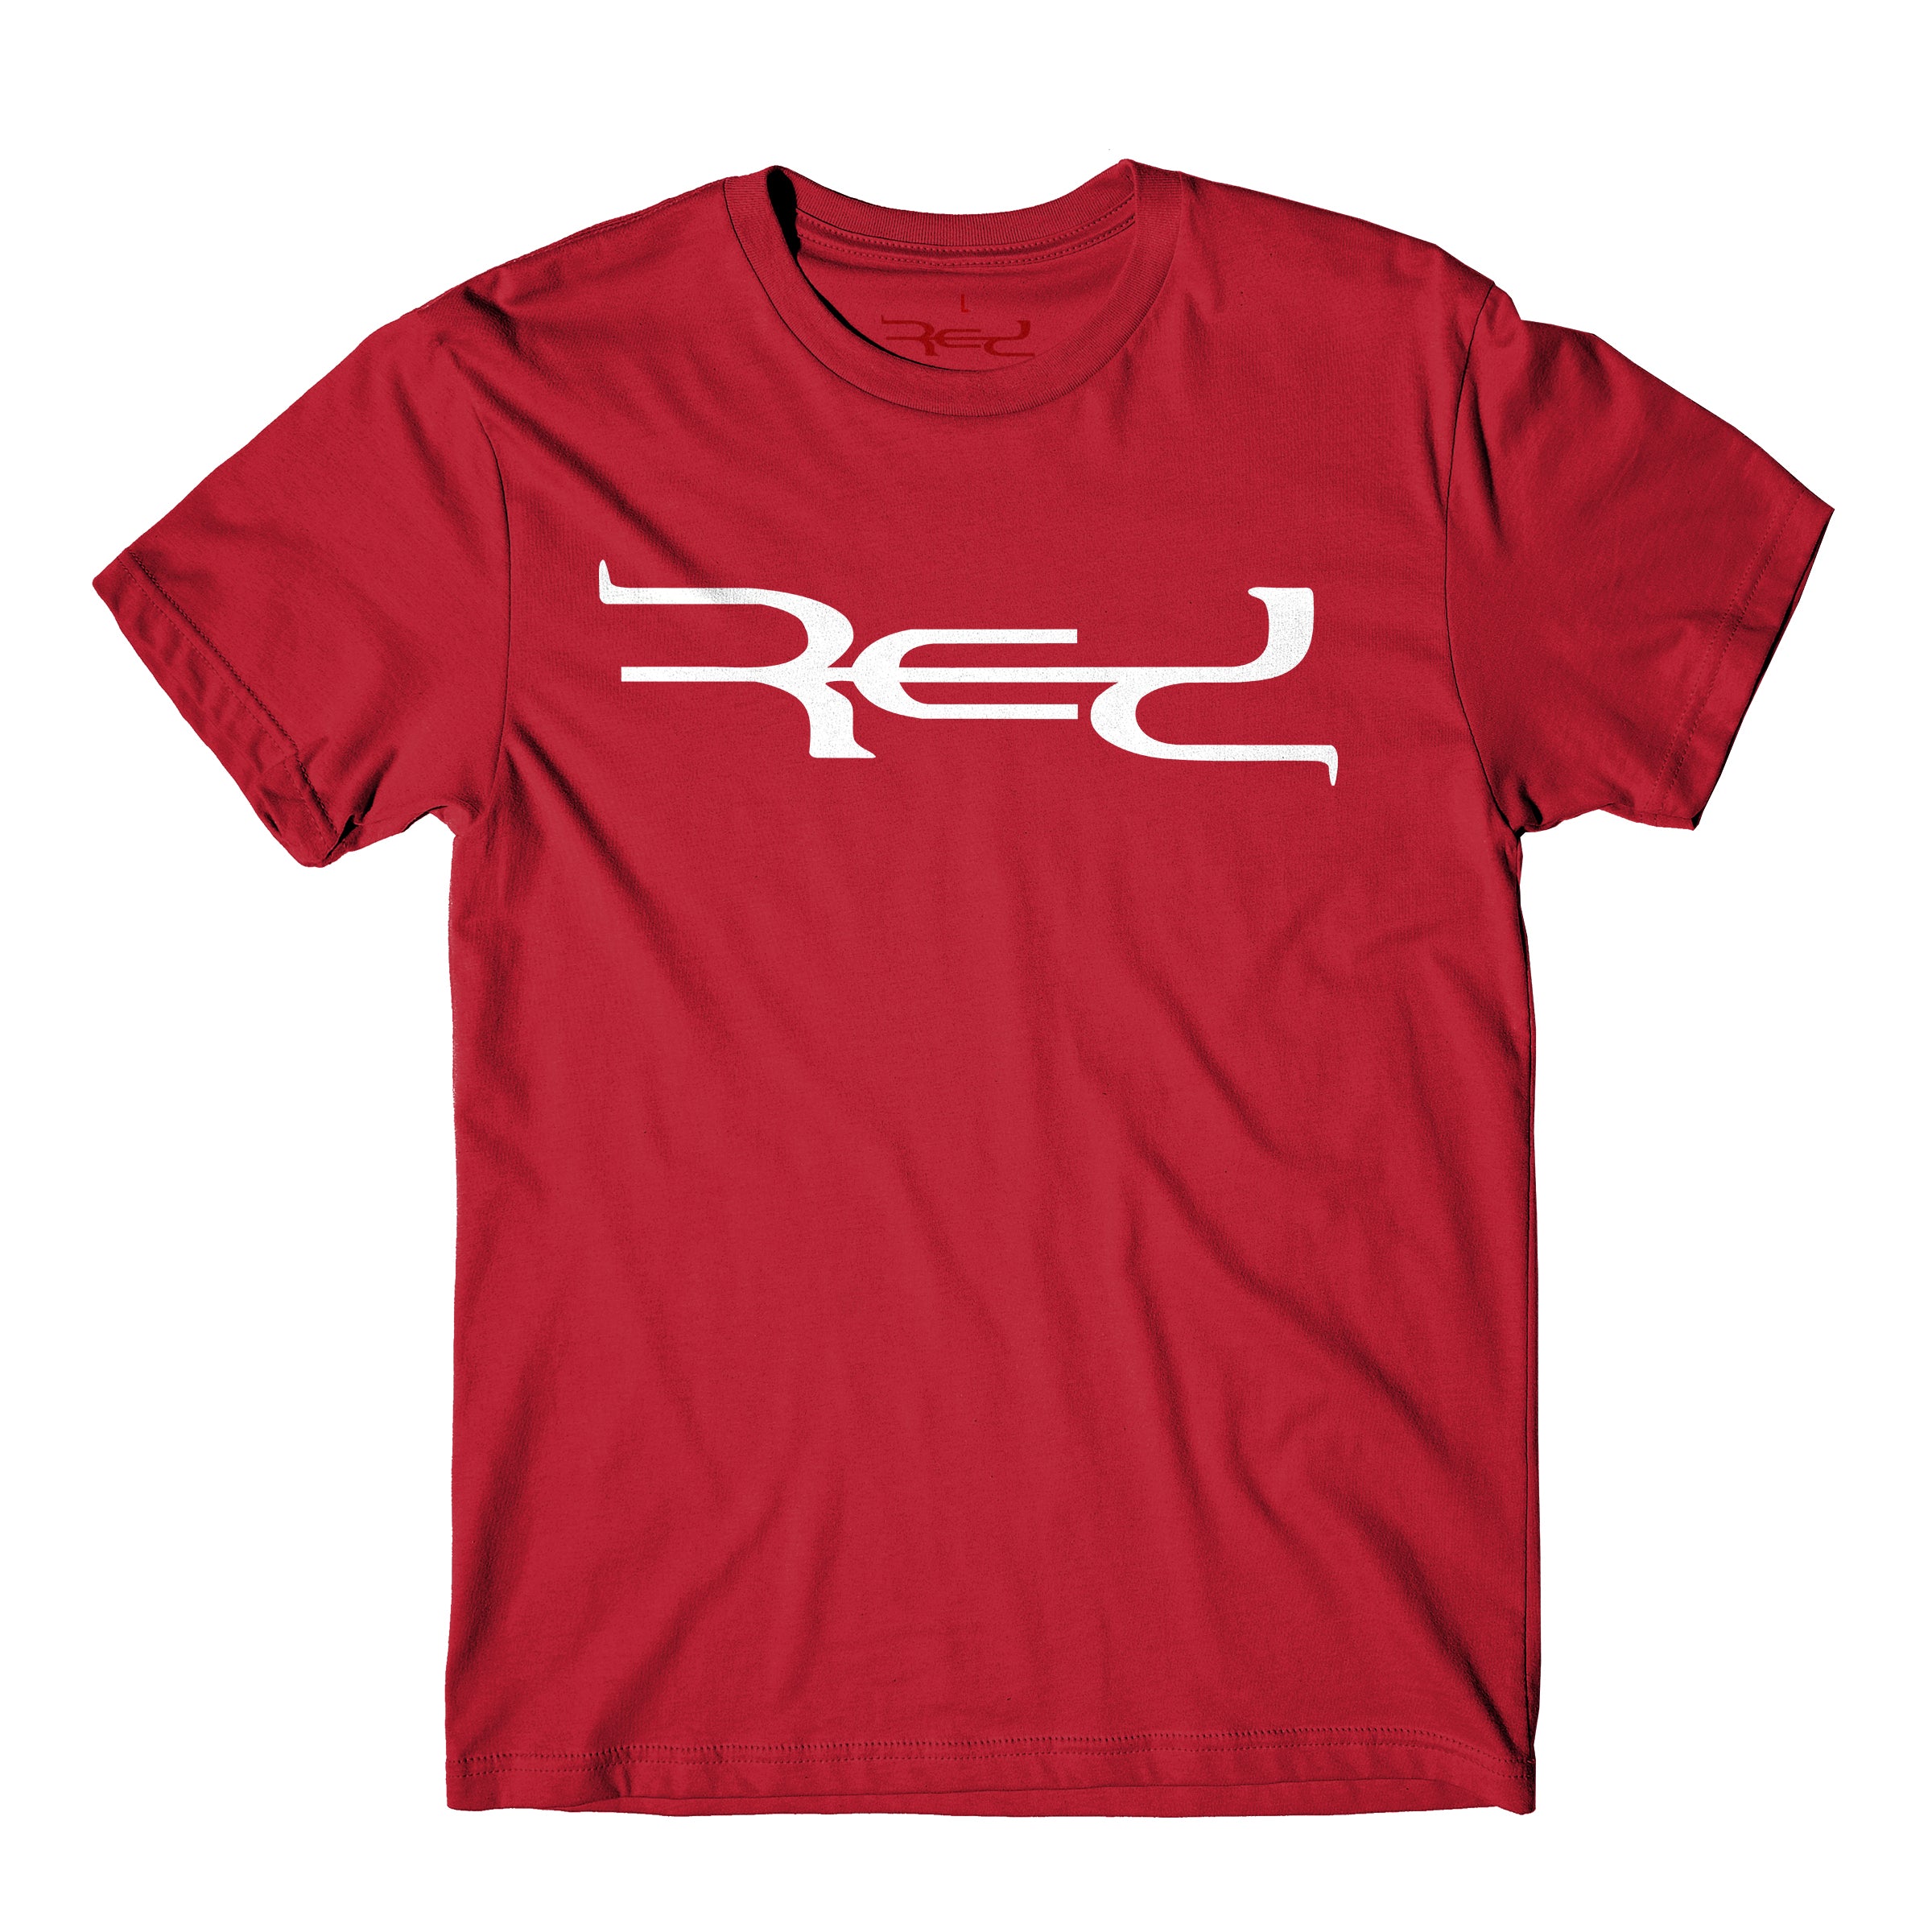 Classic RED (in RED) Tee